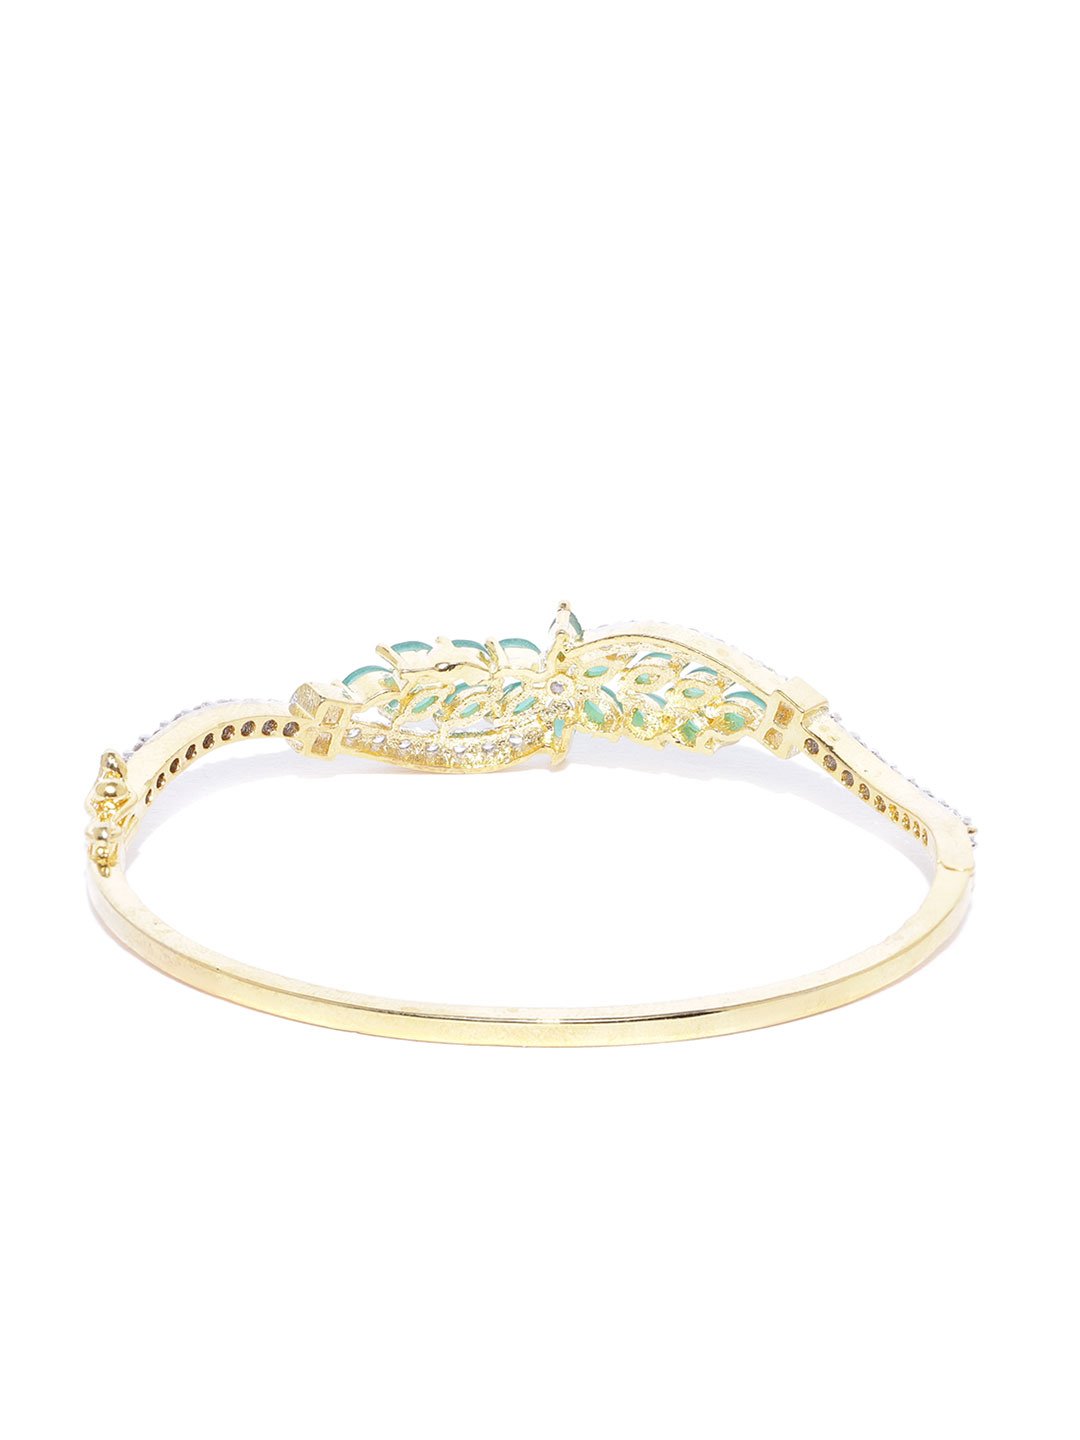 Women's Gold-Plated American Diamond and Emerald Studded, Floral Patterned Bracelet in Green Color - Priyaasi